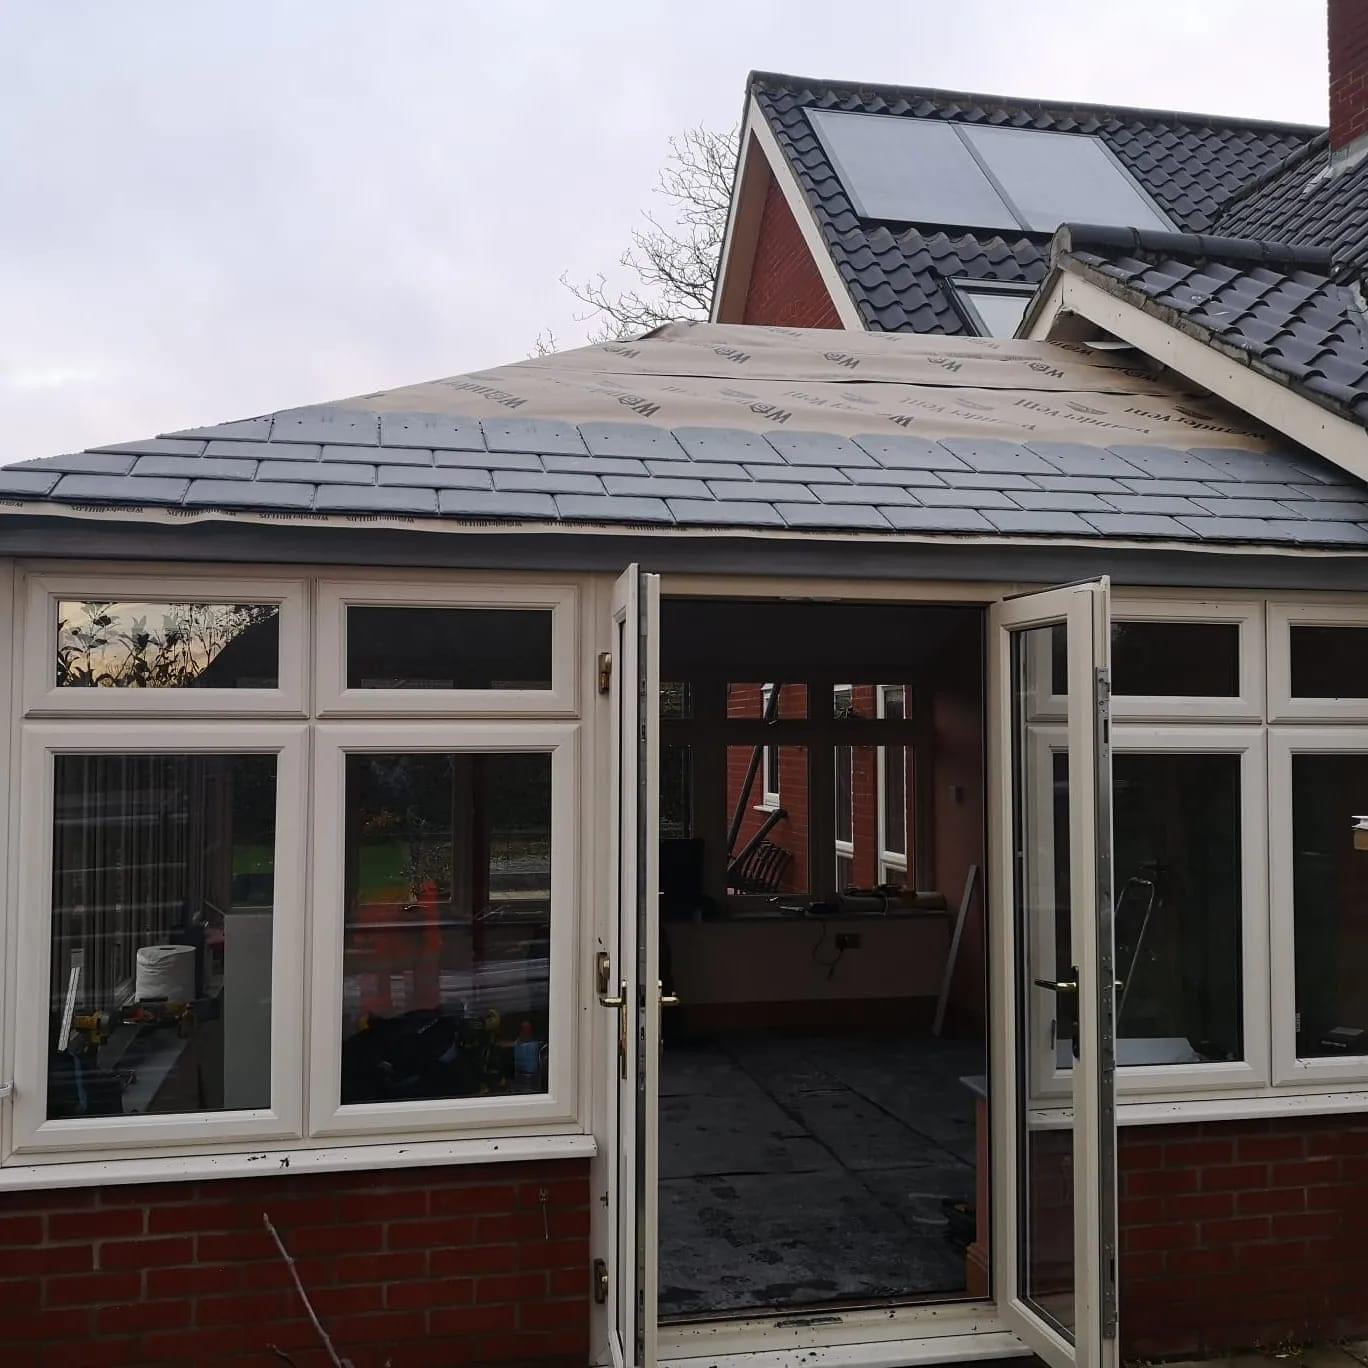 Tiled conservatory roof with door open